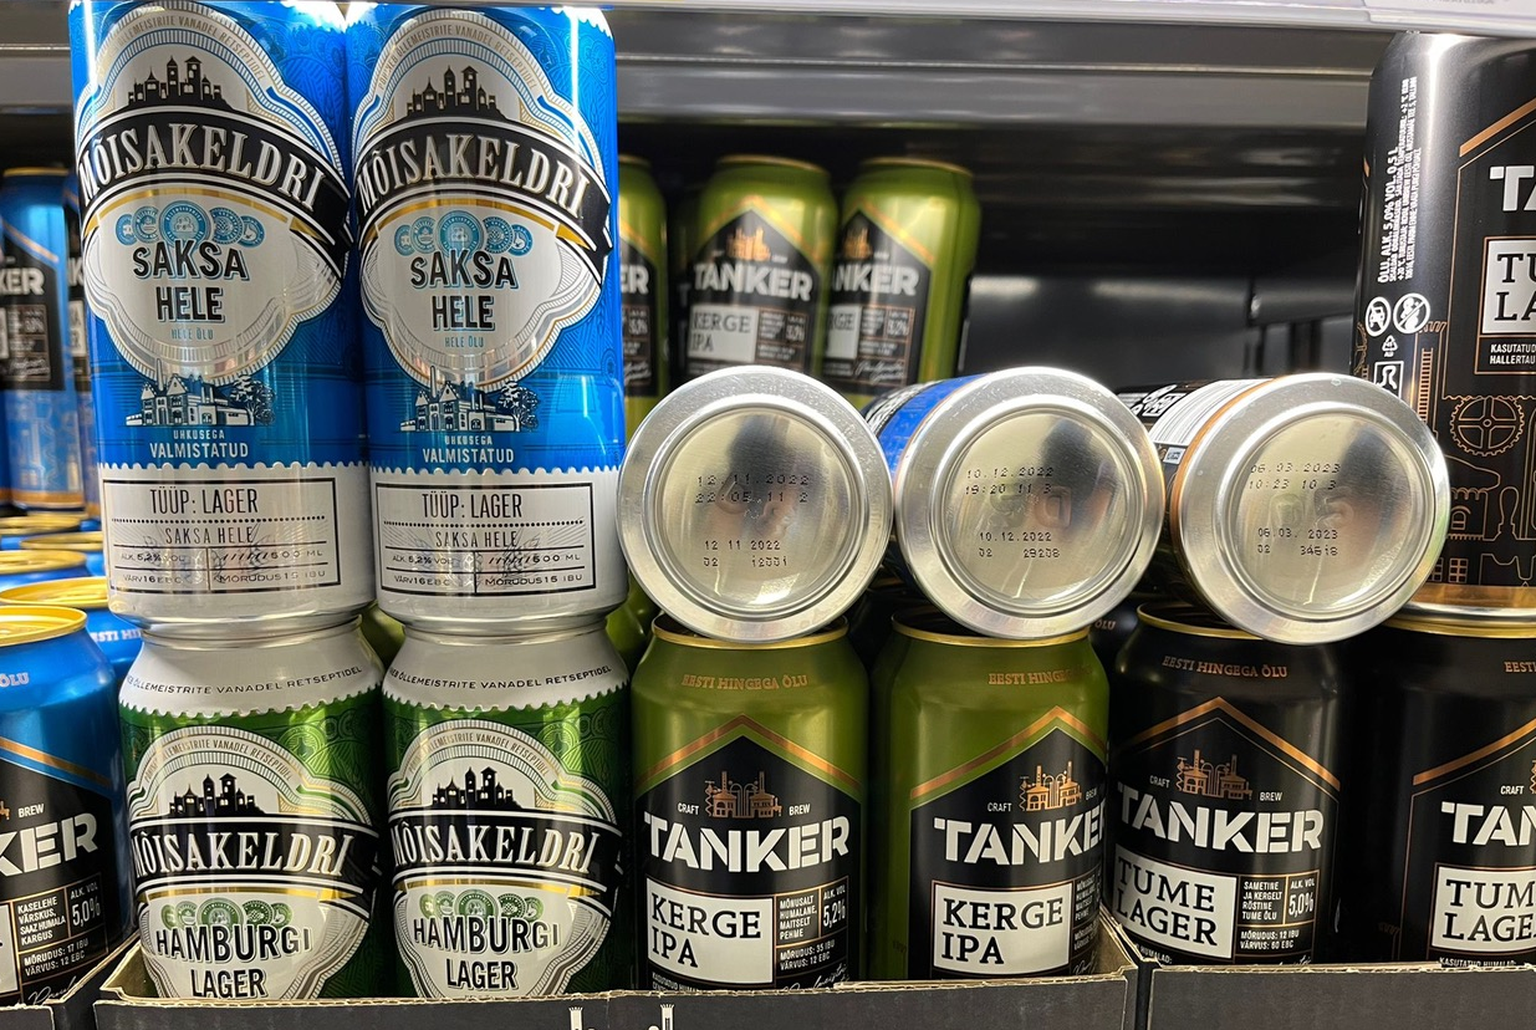 Manor cellar and Tanker beers on the store.